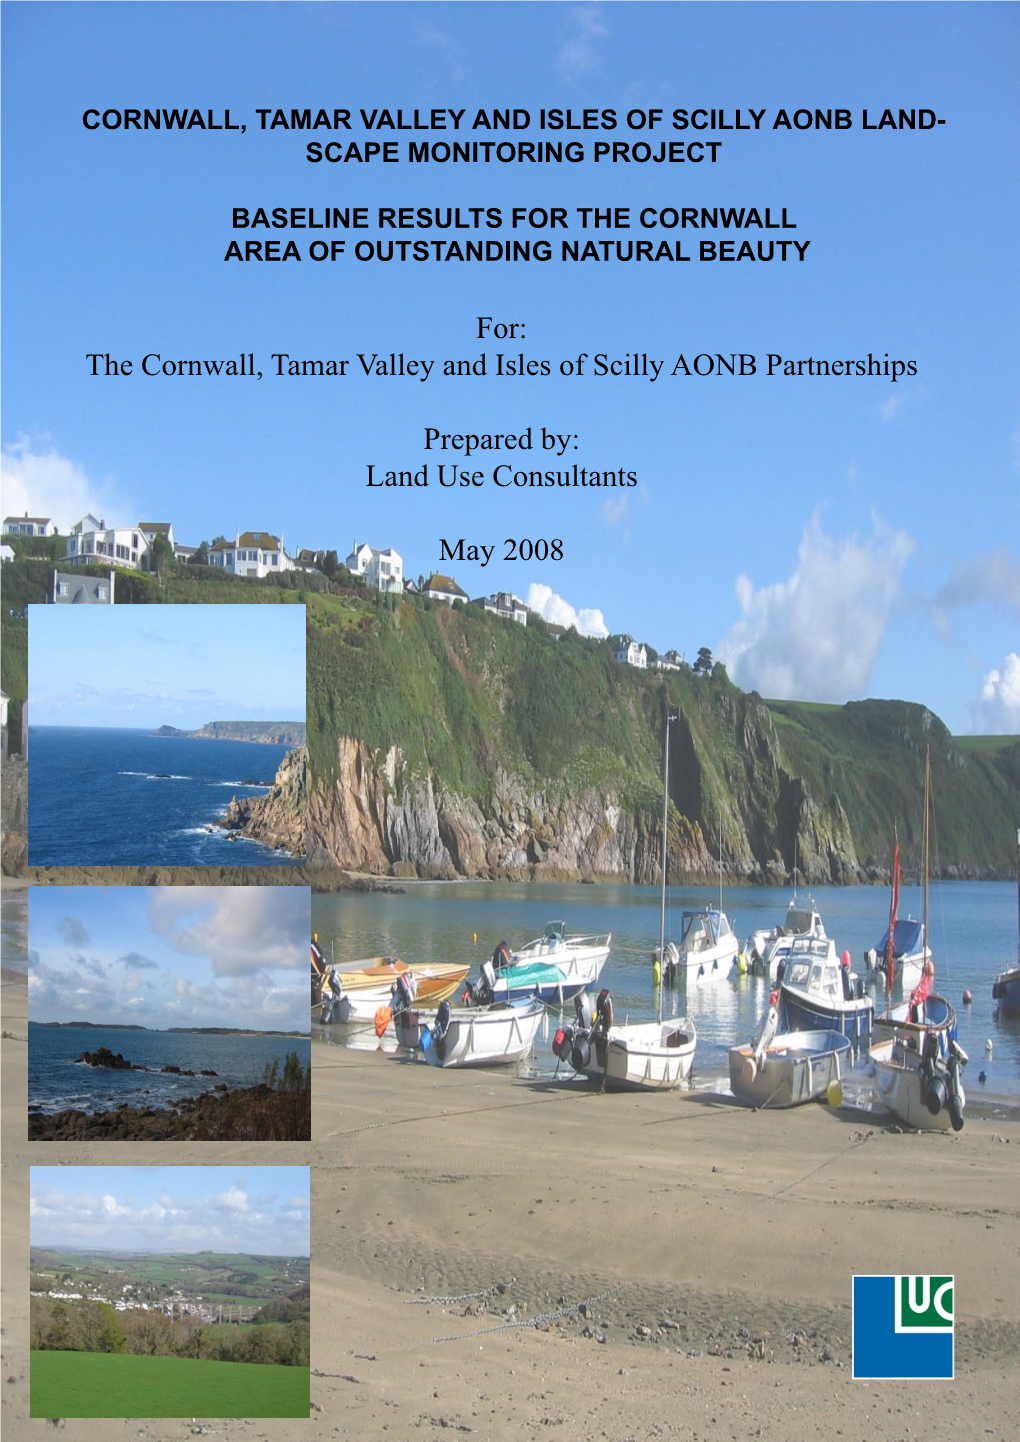 For: the Cornwall, Tamar Valley and Isles of Scilly AONB Partnerships